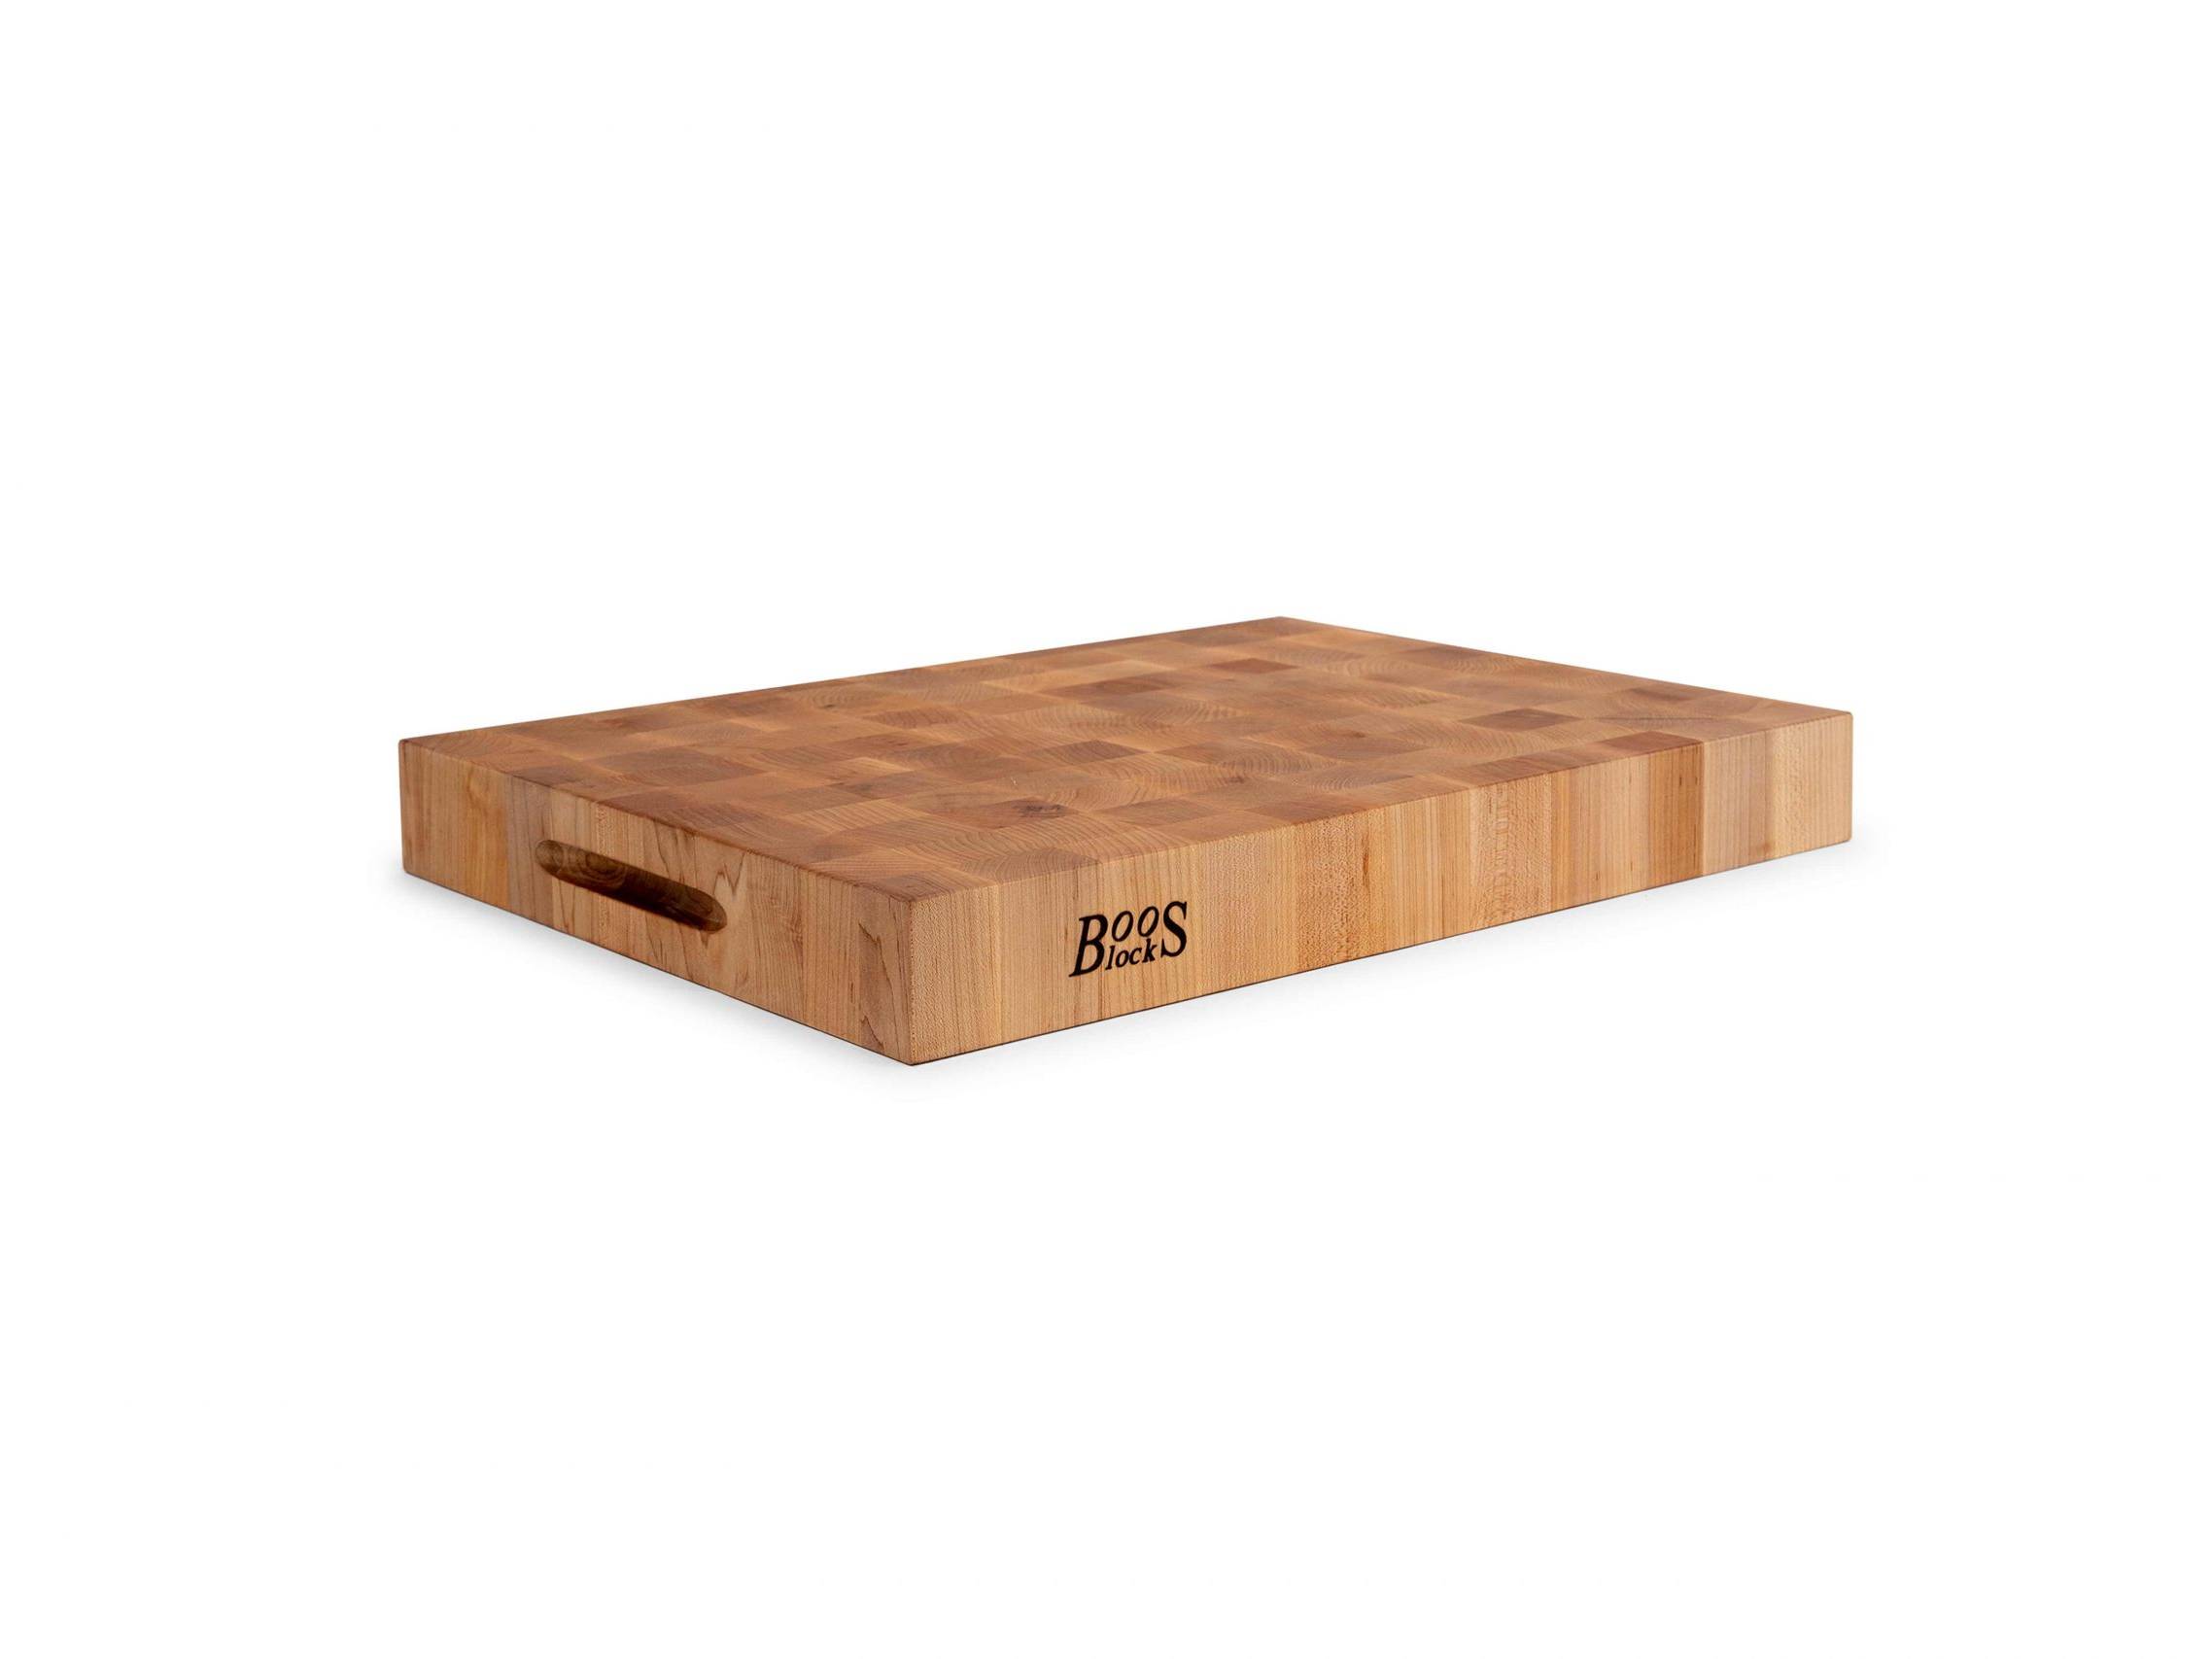 Boos® Hard Maple face wood chopping board with recessed grips; can be used on both sides 55